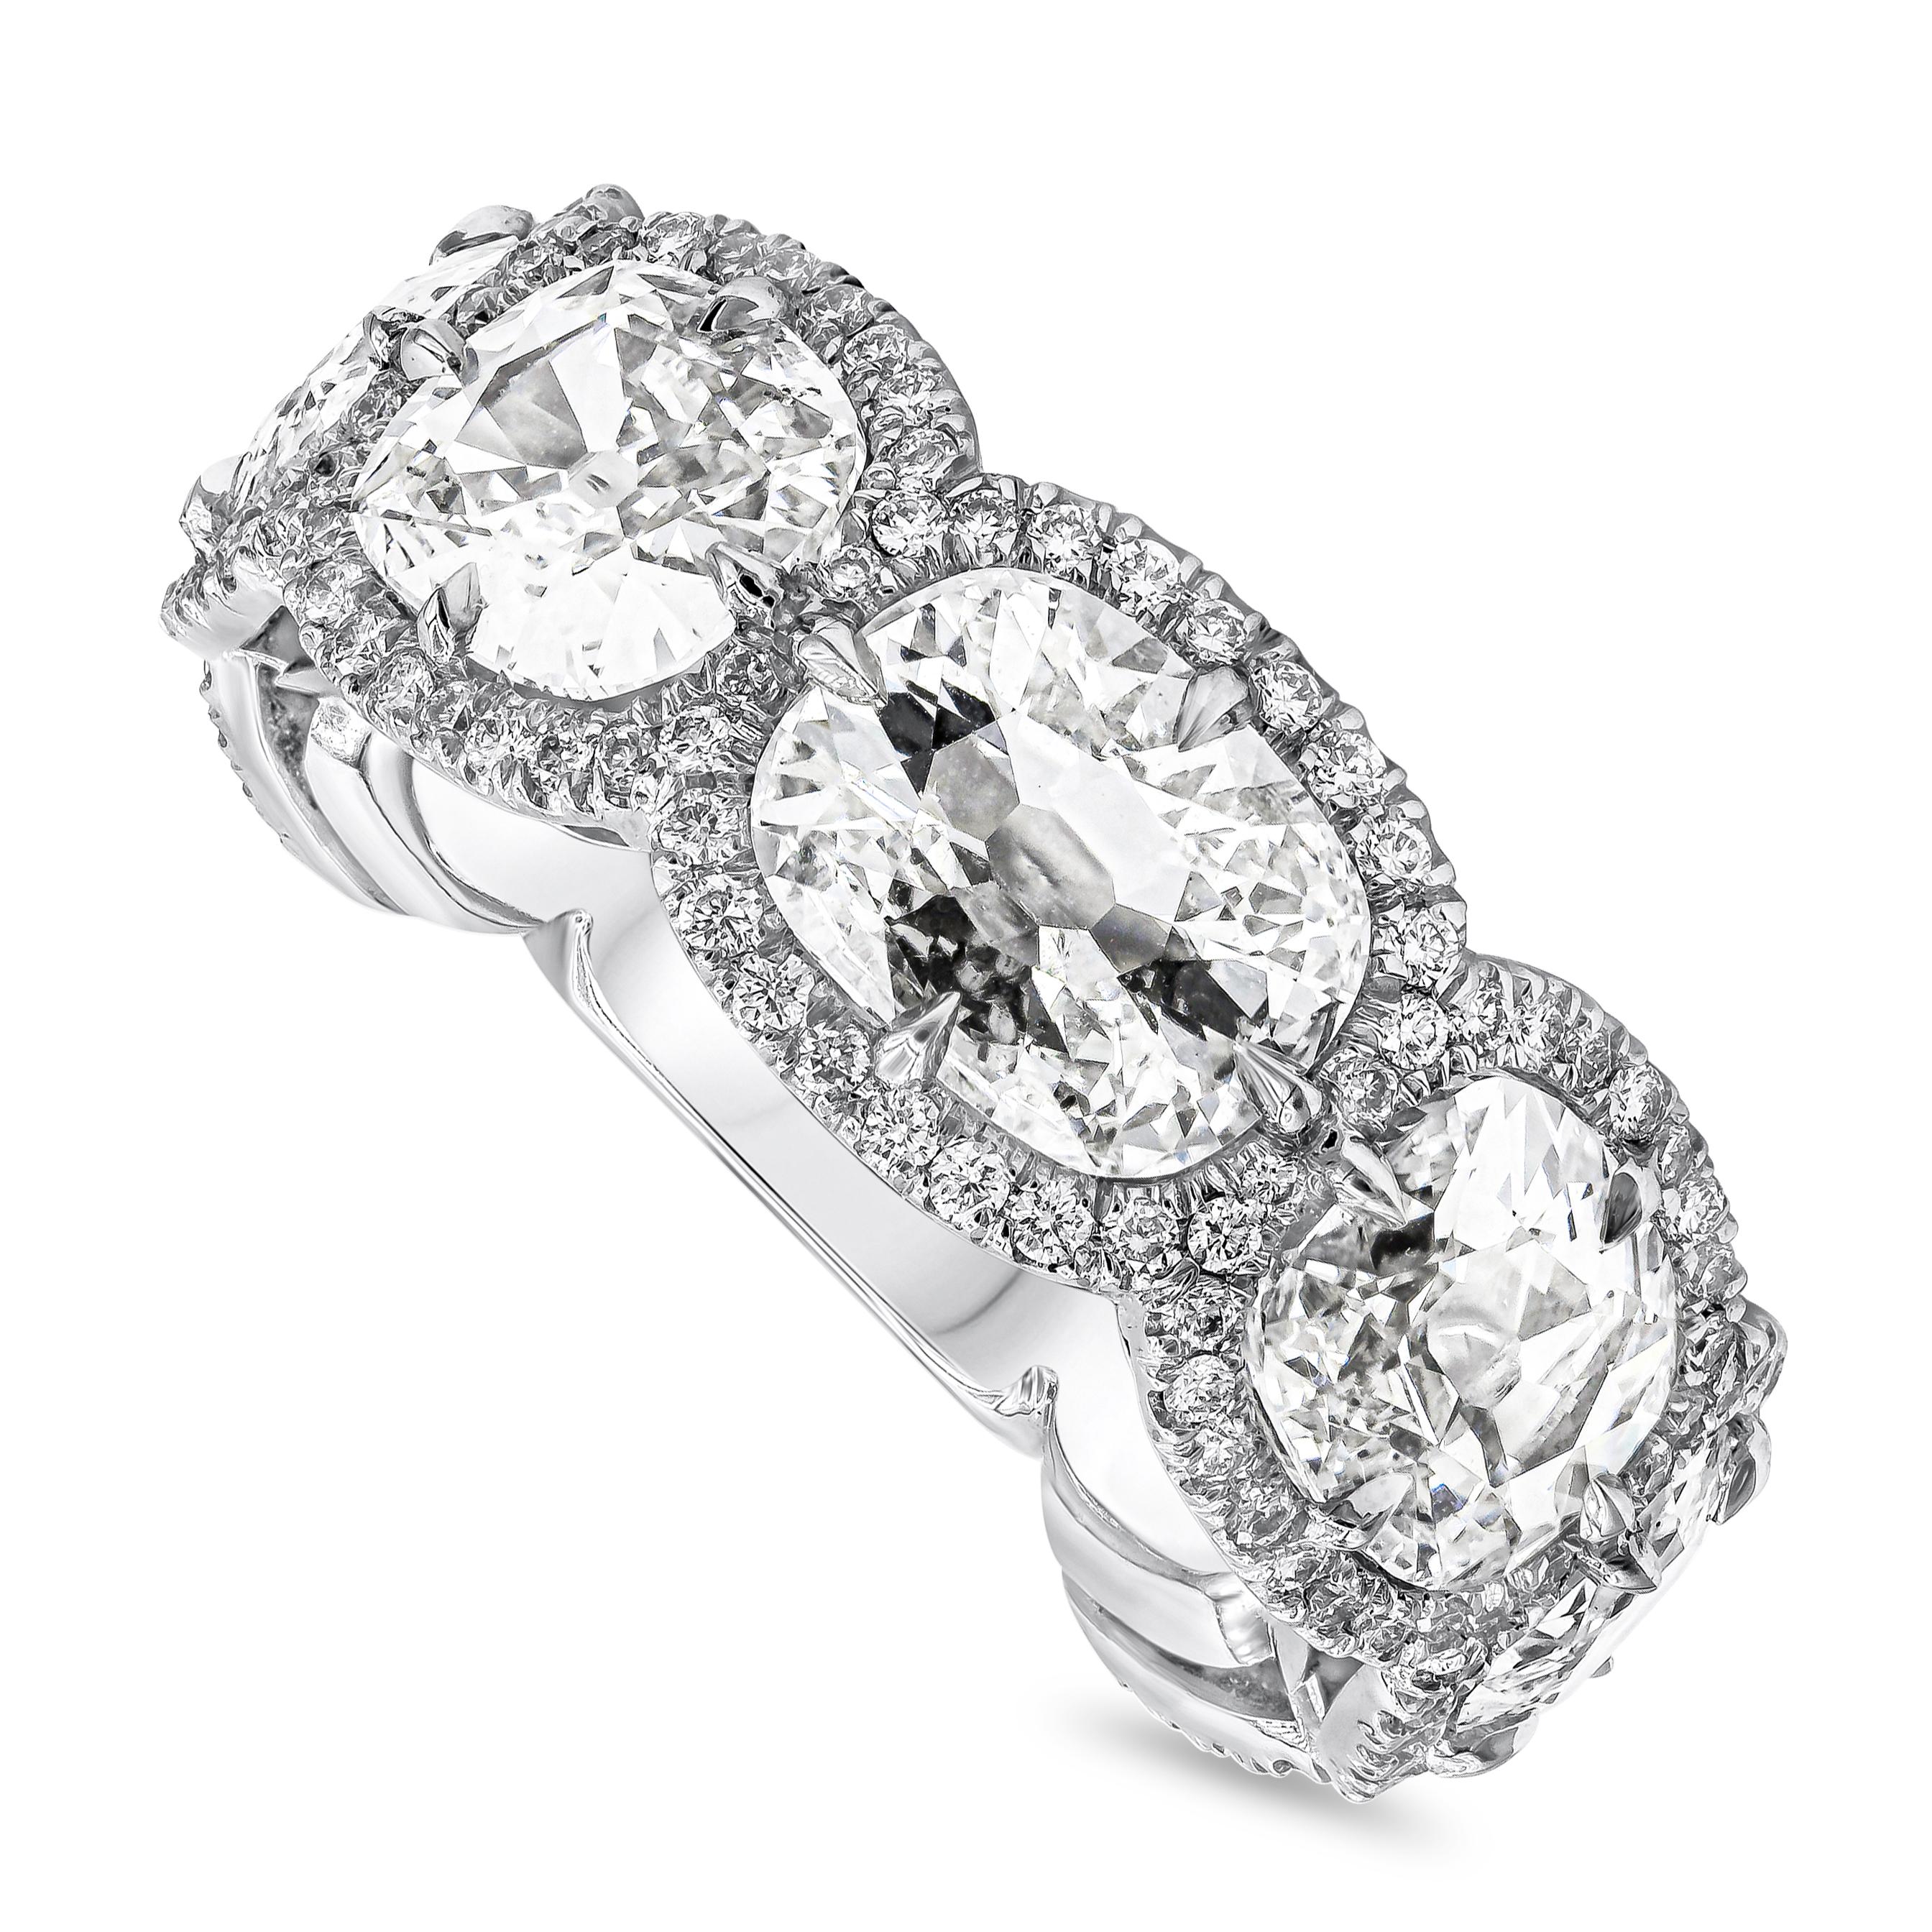 Well crafted seven stone diamond halo wedding band showcasing cushion cut diamonds weighing 5.96 carats total, each set on a four prong halo setting. Accented by brilliant round diamonds weighing 0.76 carats total. Finely made in polished platinum.